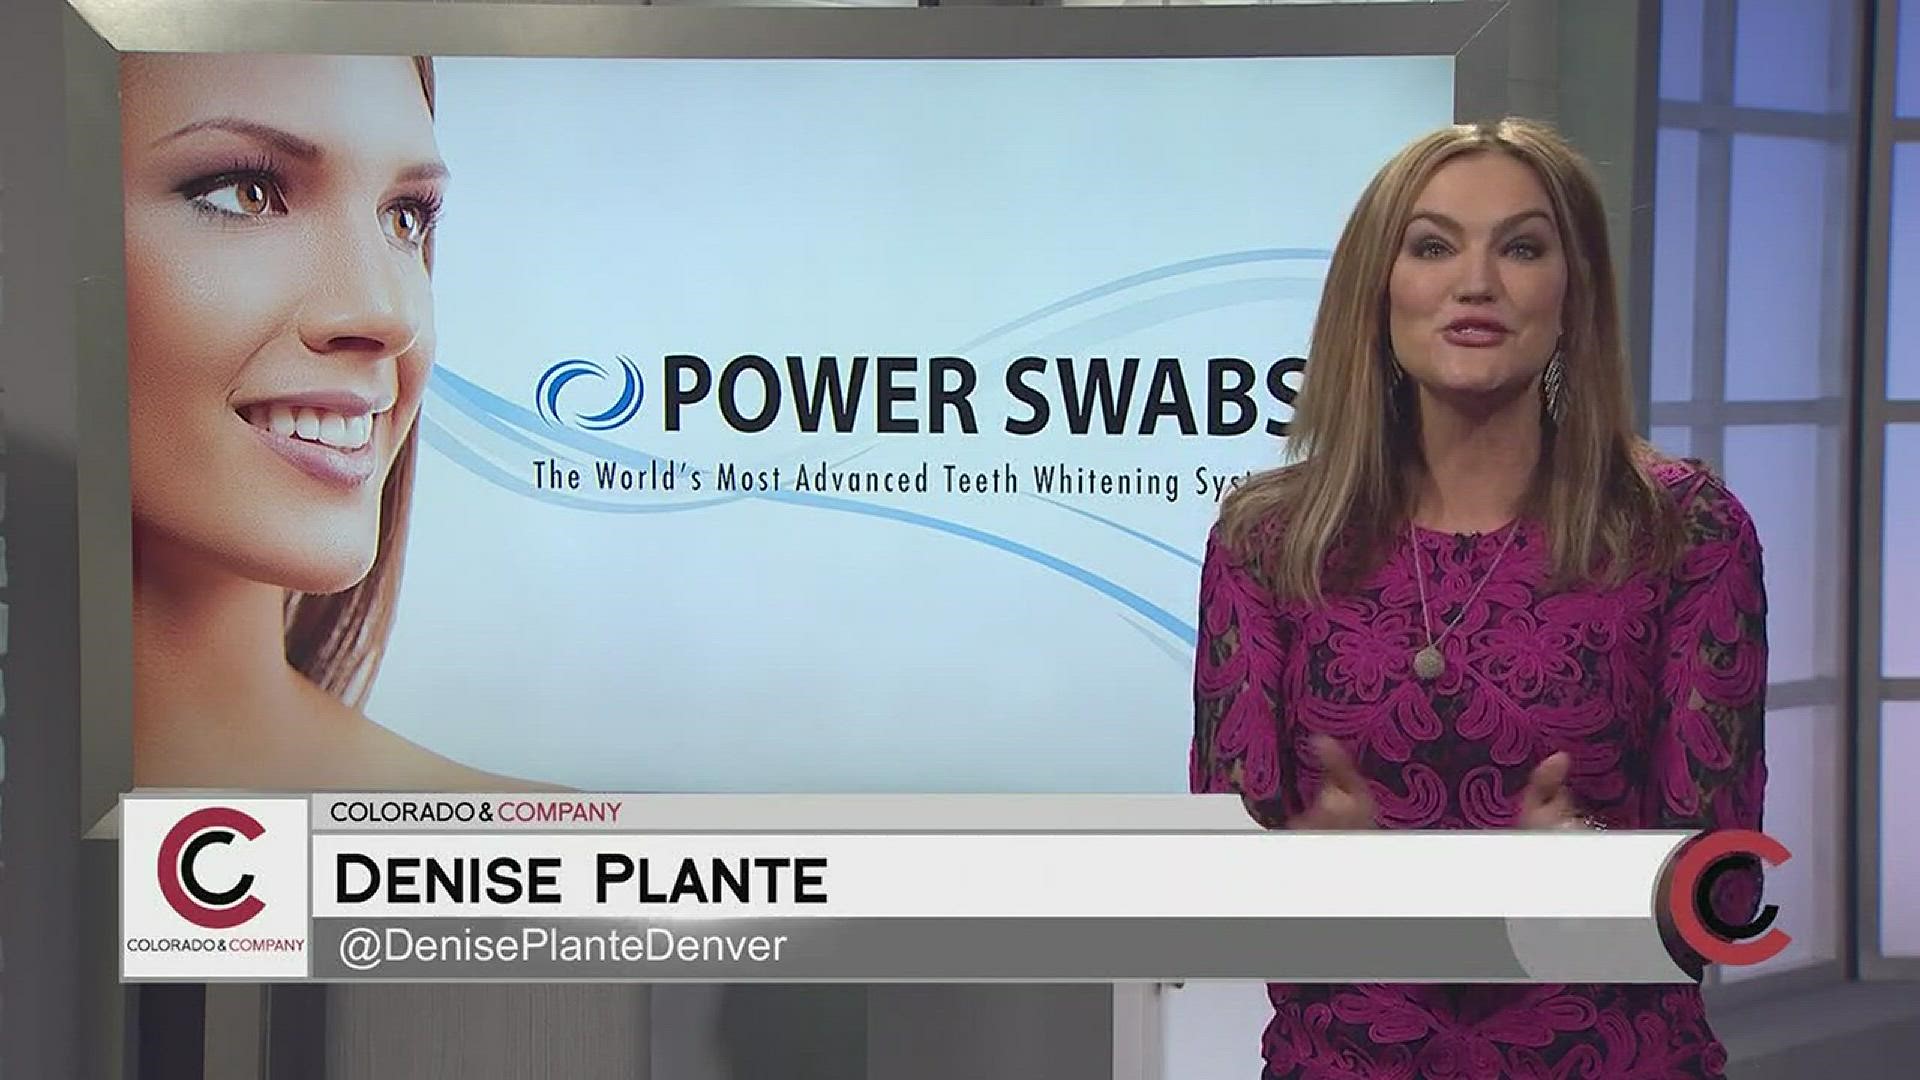 Enjoy a whiter and brighter smile in time for the holidays! Call now and ask for the special Colorado and Company offer for power swabs! You'll save 40% off and shipping is also free. The number to call is 800.489.9733. You can also order online at www.powerswabs.com.